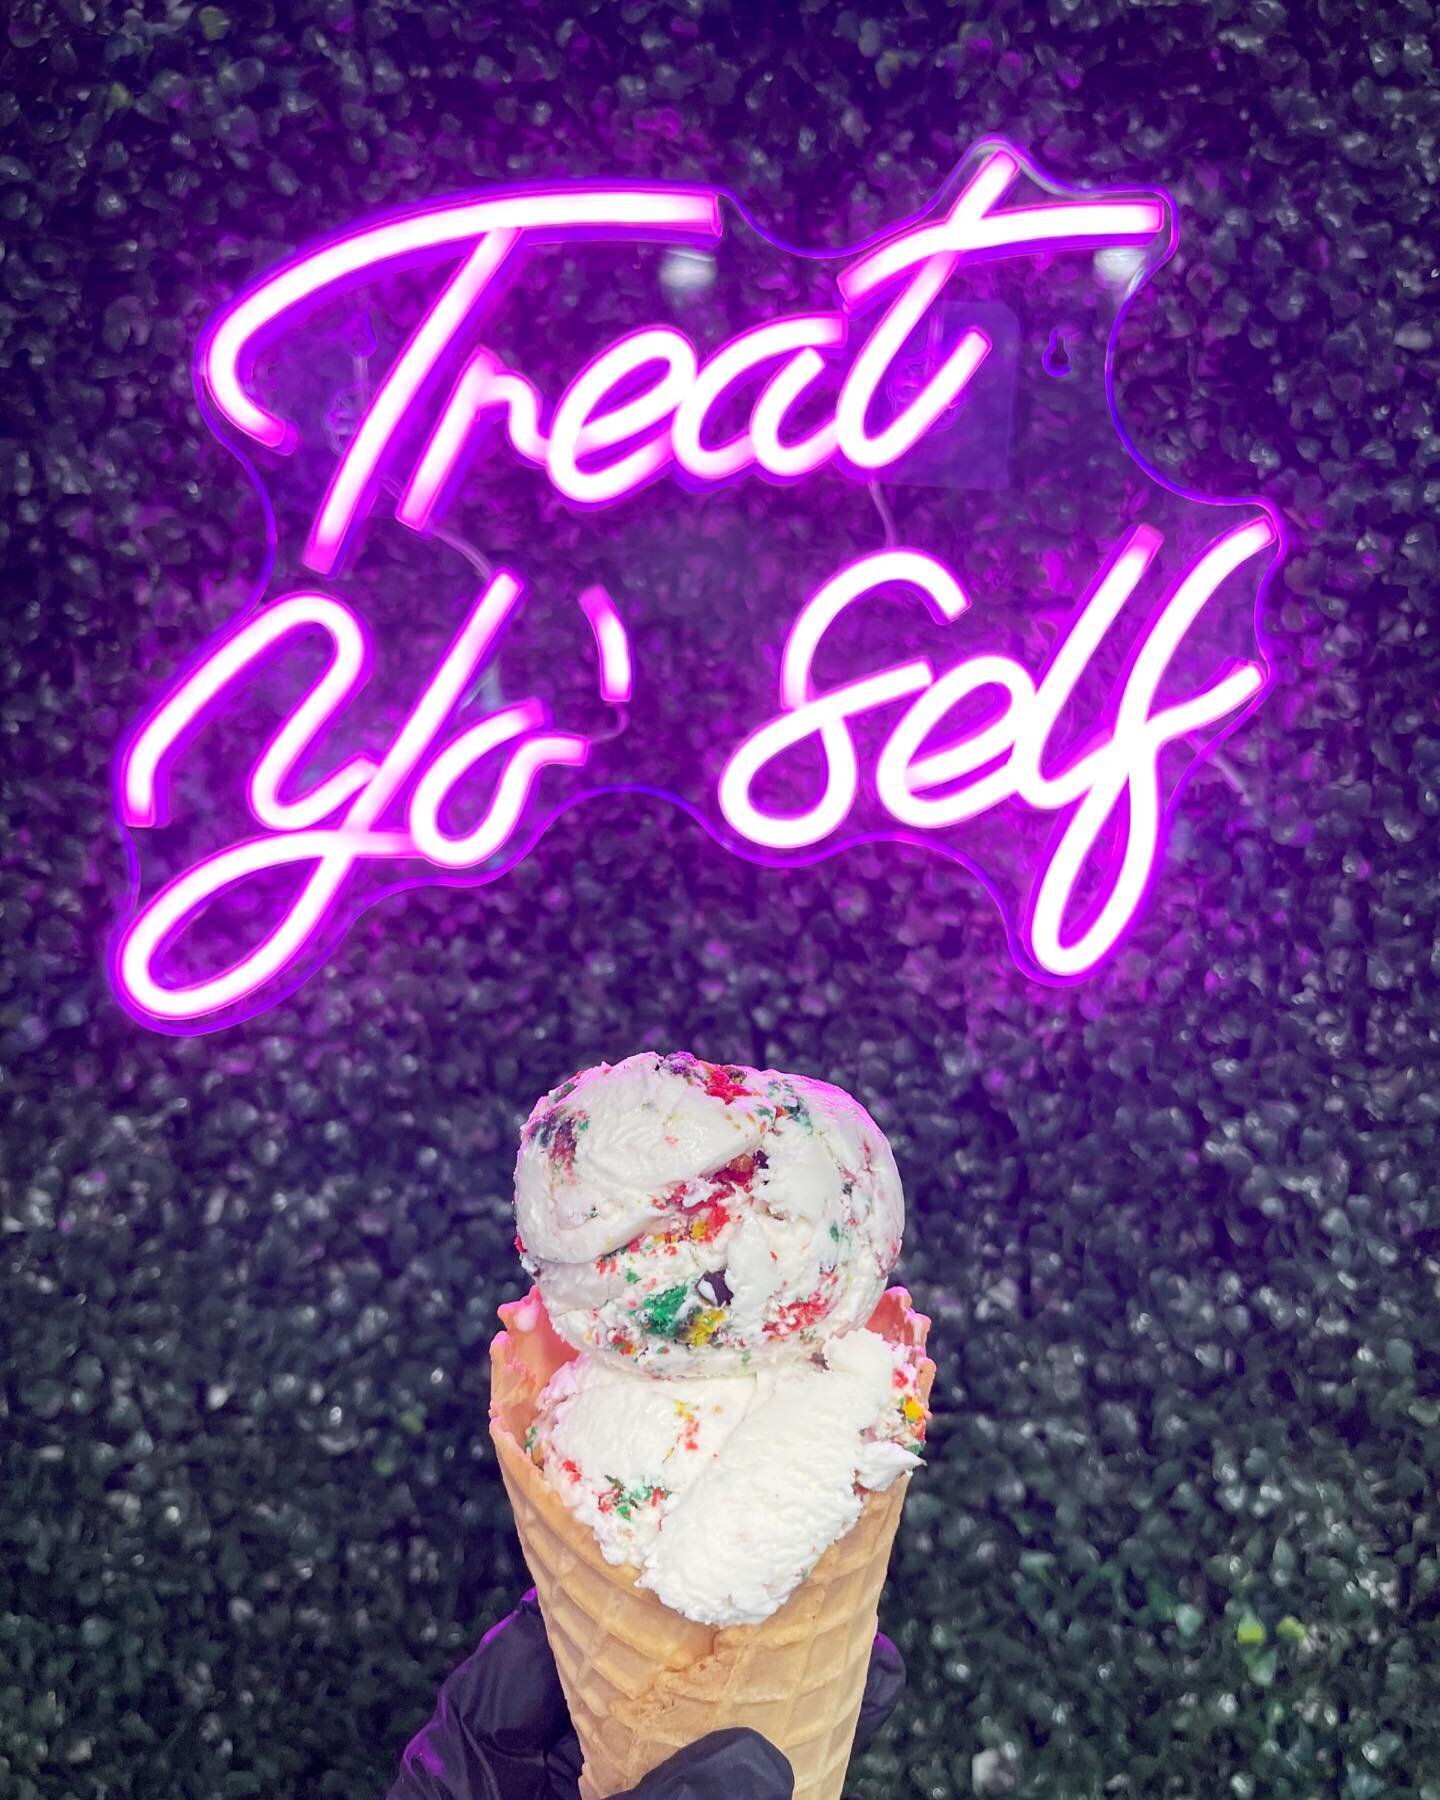 Special announcement🍦‼️
Scoops and cones has something special coming&hellip;
We have officially started to make some custom flavors! These flavors are creamy, homemade and simply out of this world. 
Come to our Farmingdale location and try our new 